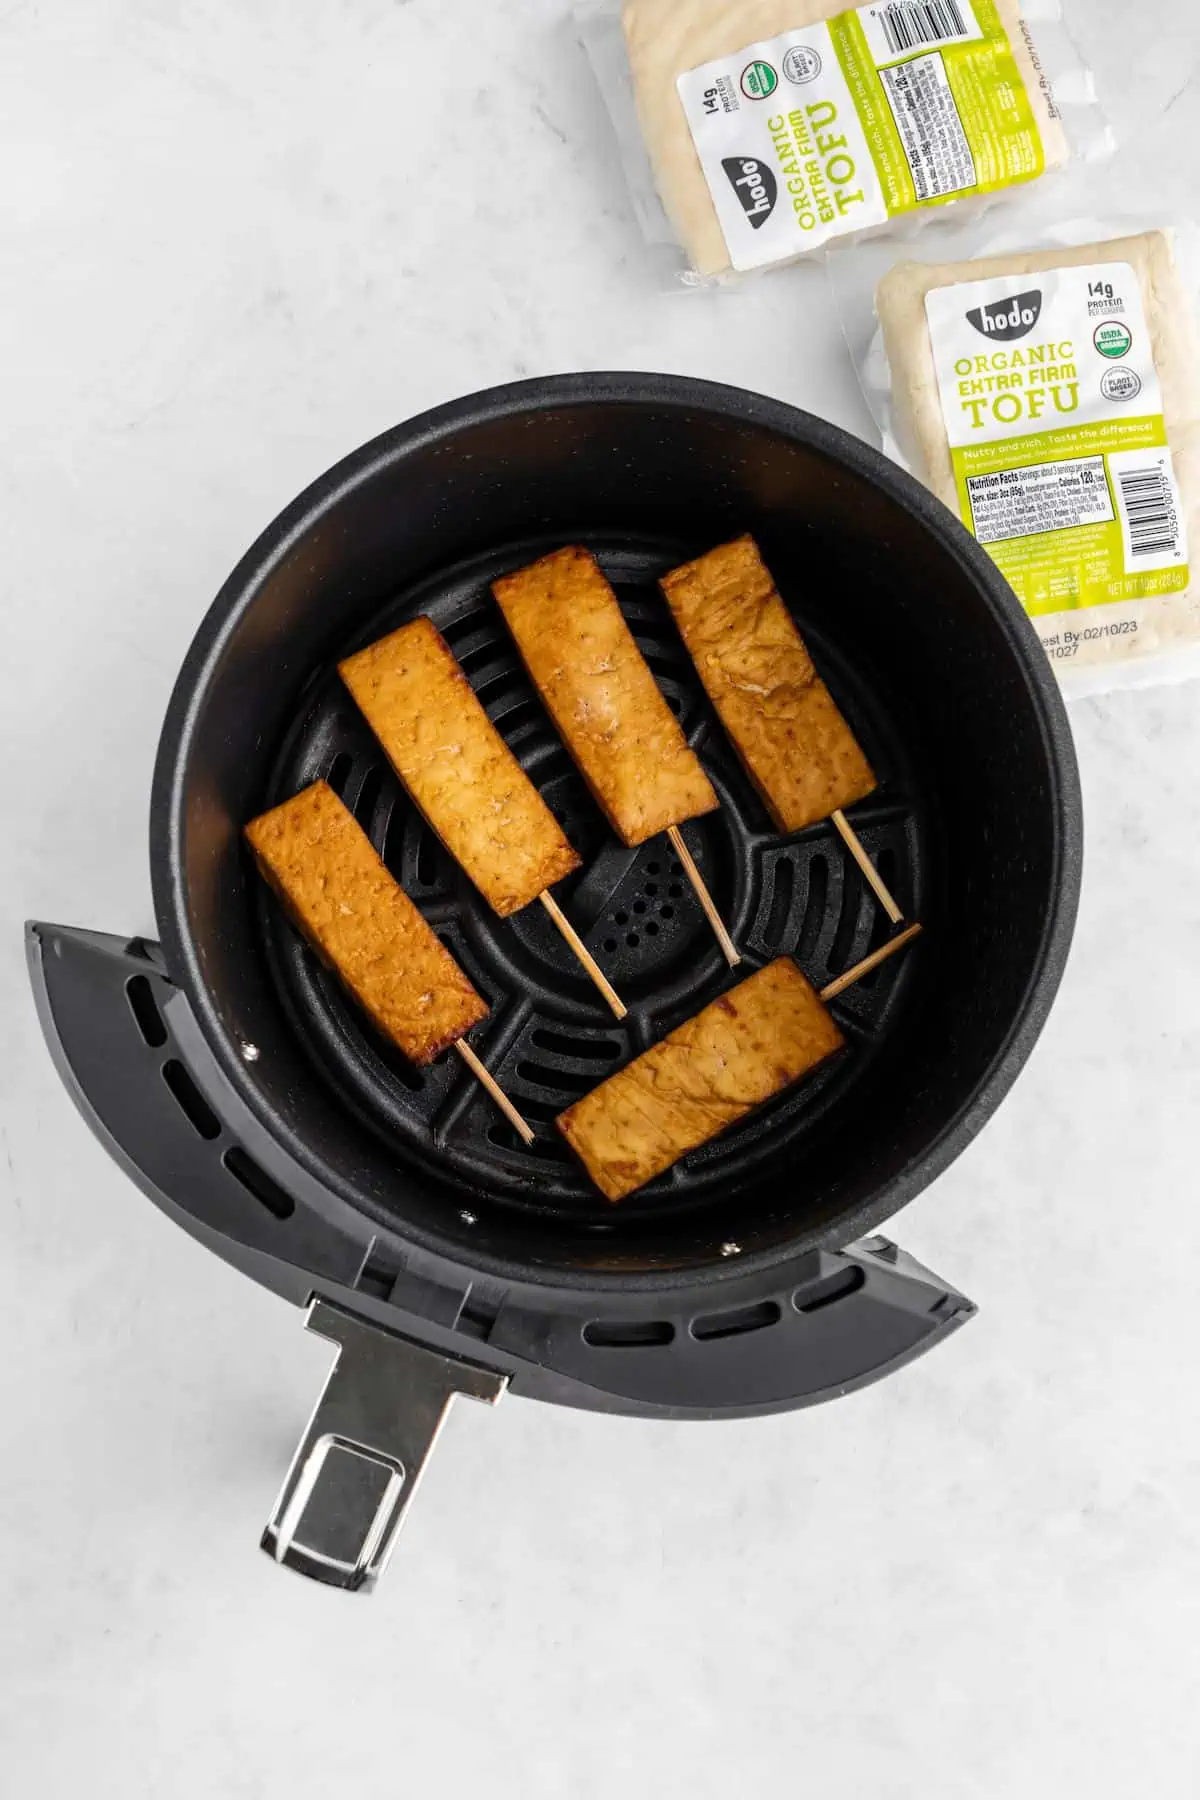 Tofu satay in an air fryer basket after its been cooked can become golden brown.